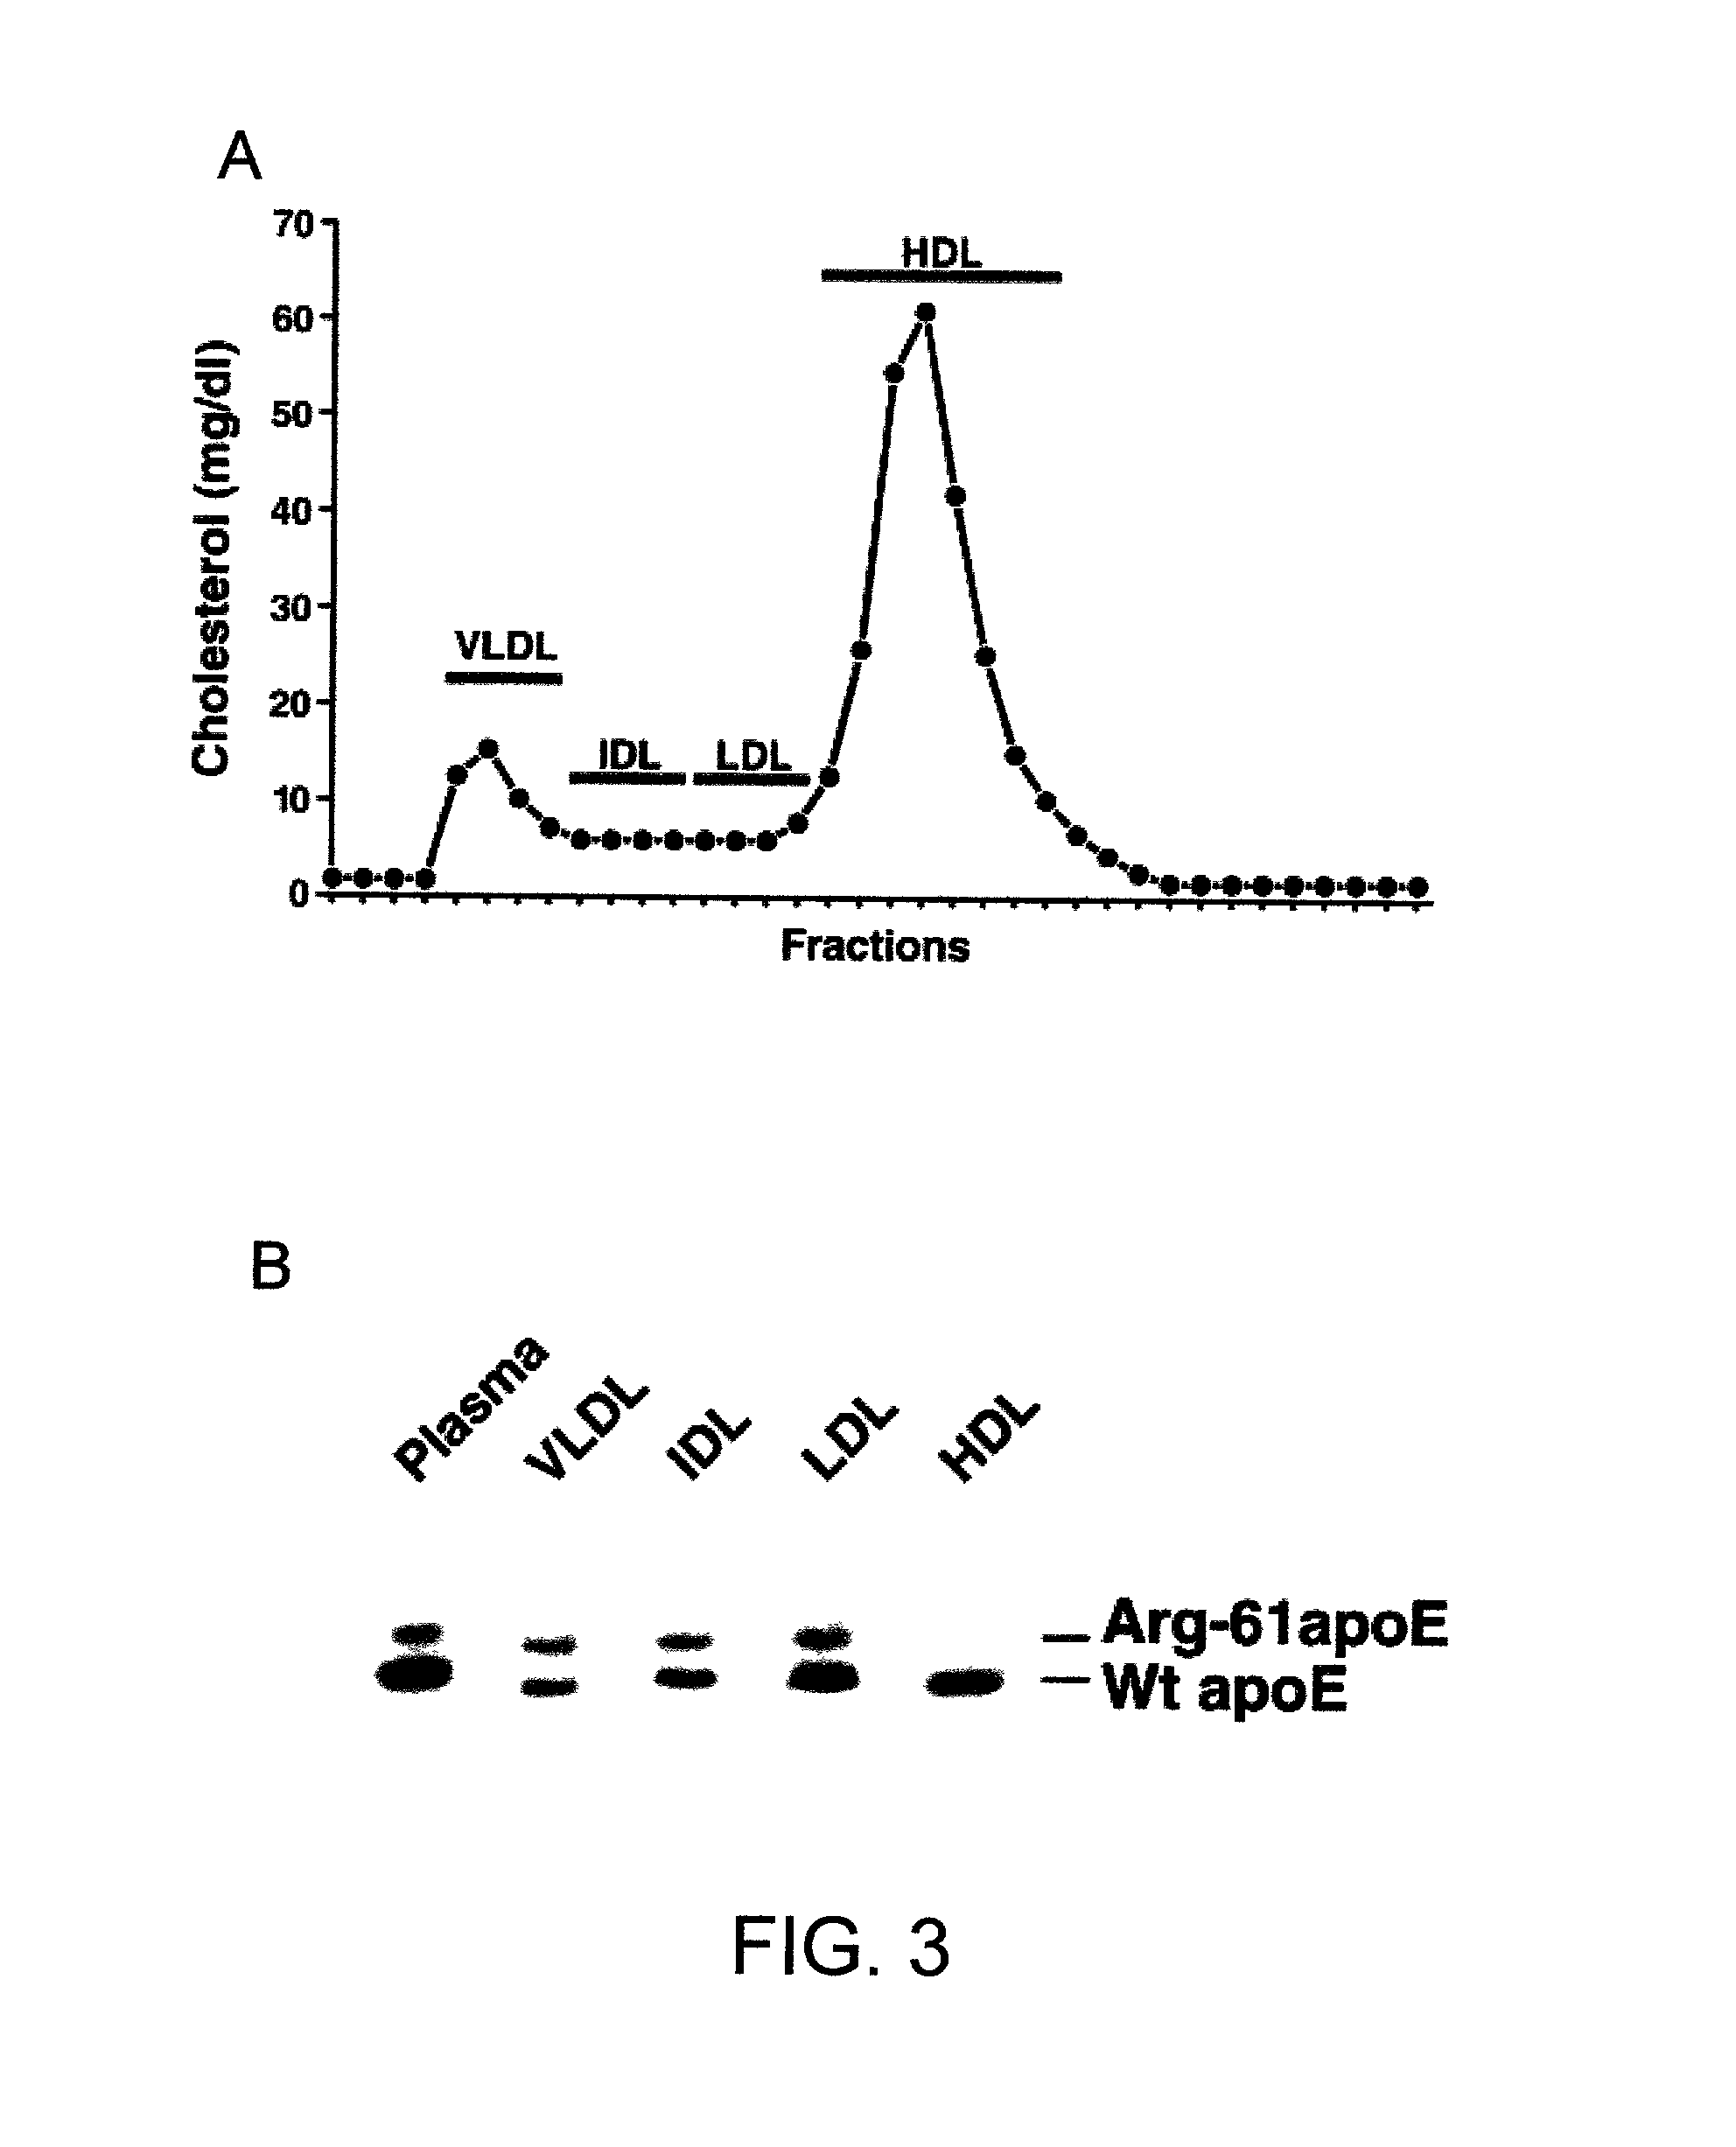 Gene-targeted animal model of apolipoprotein E4 domain interaction and uses thereof